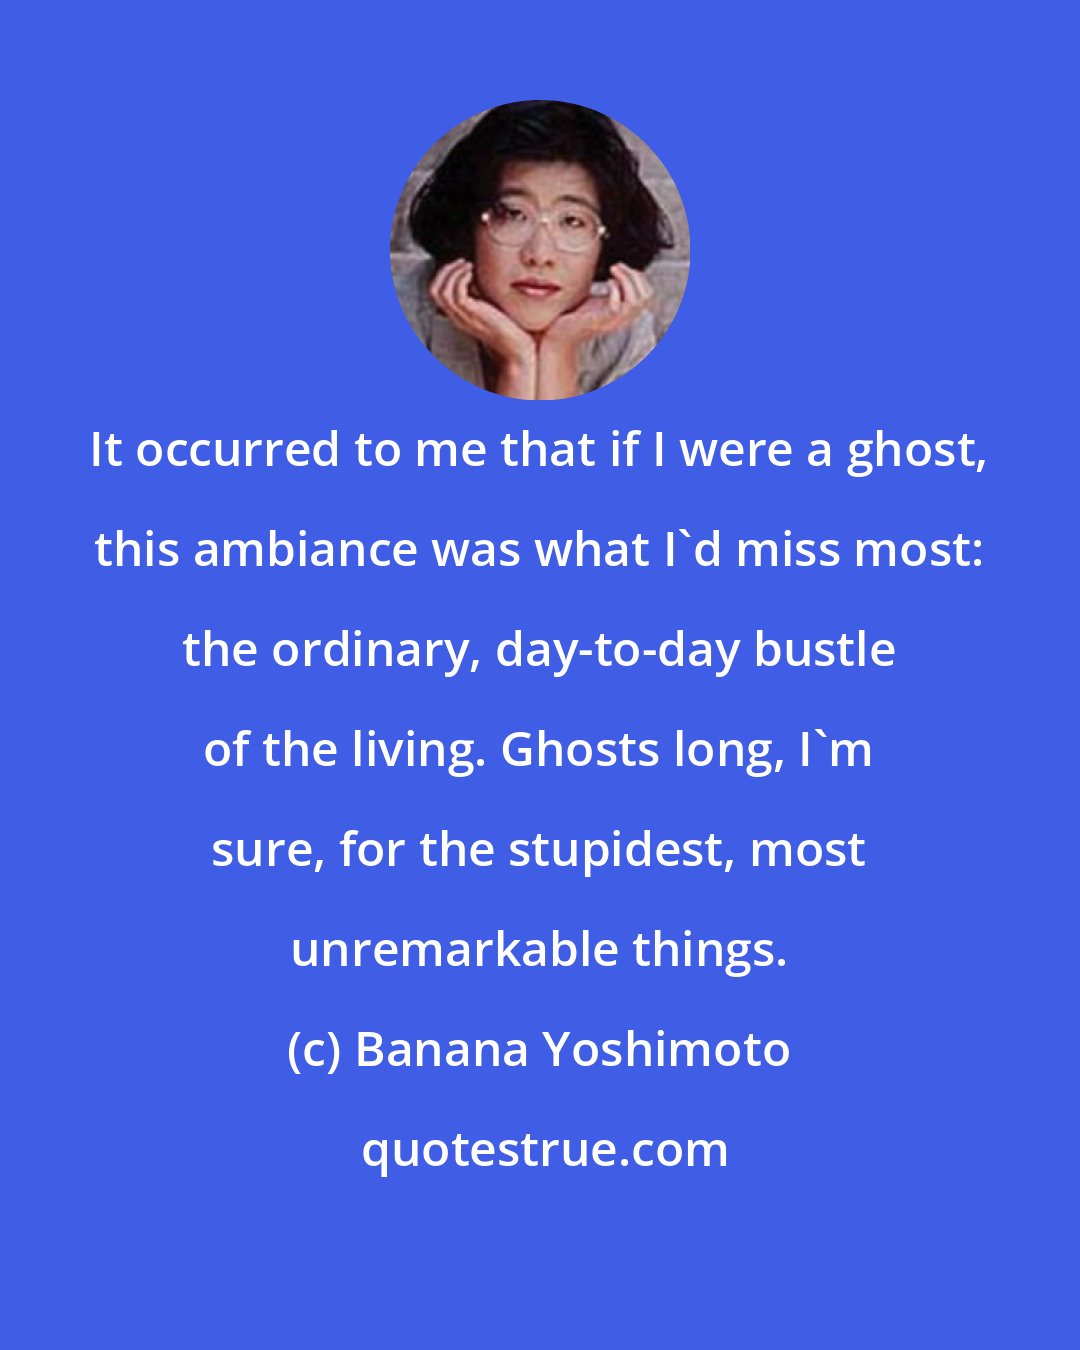 Banana Yoshimoto: It occurred to me that if I were a ghost, this ambiance was what I'd miss most: the ordinary, day-to-day bustle of the living. Ghosts long, I'm sure, for the stupidest, most unremarkable things.